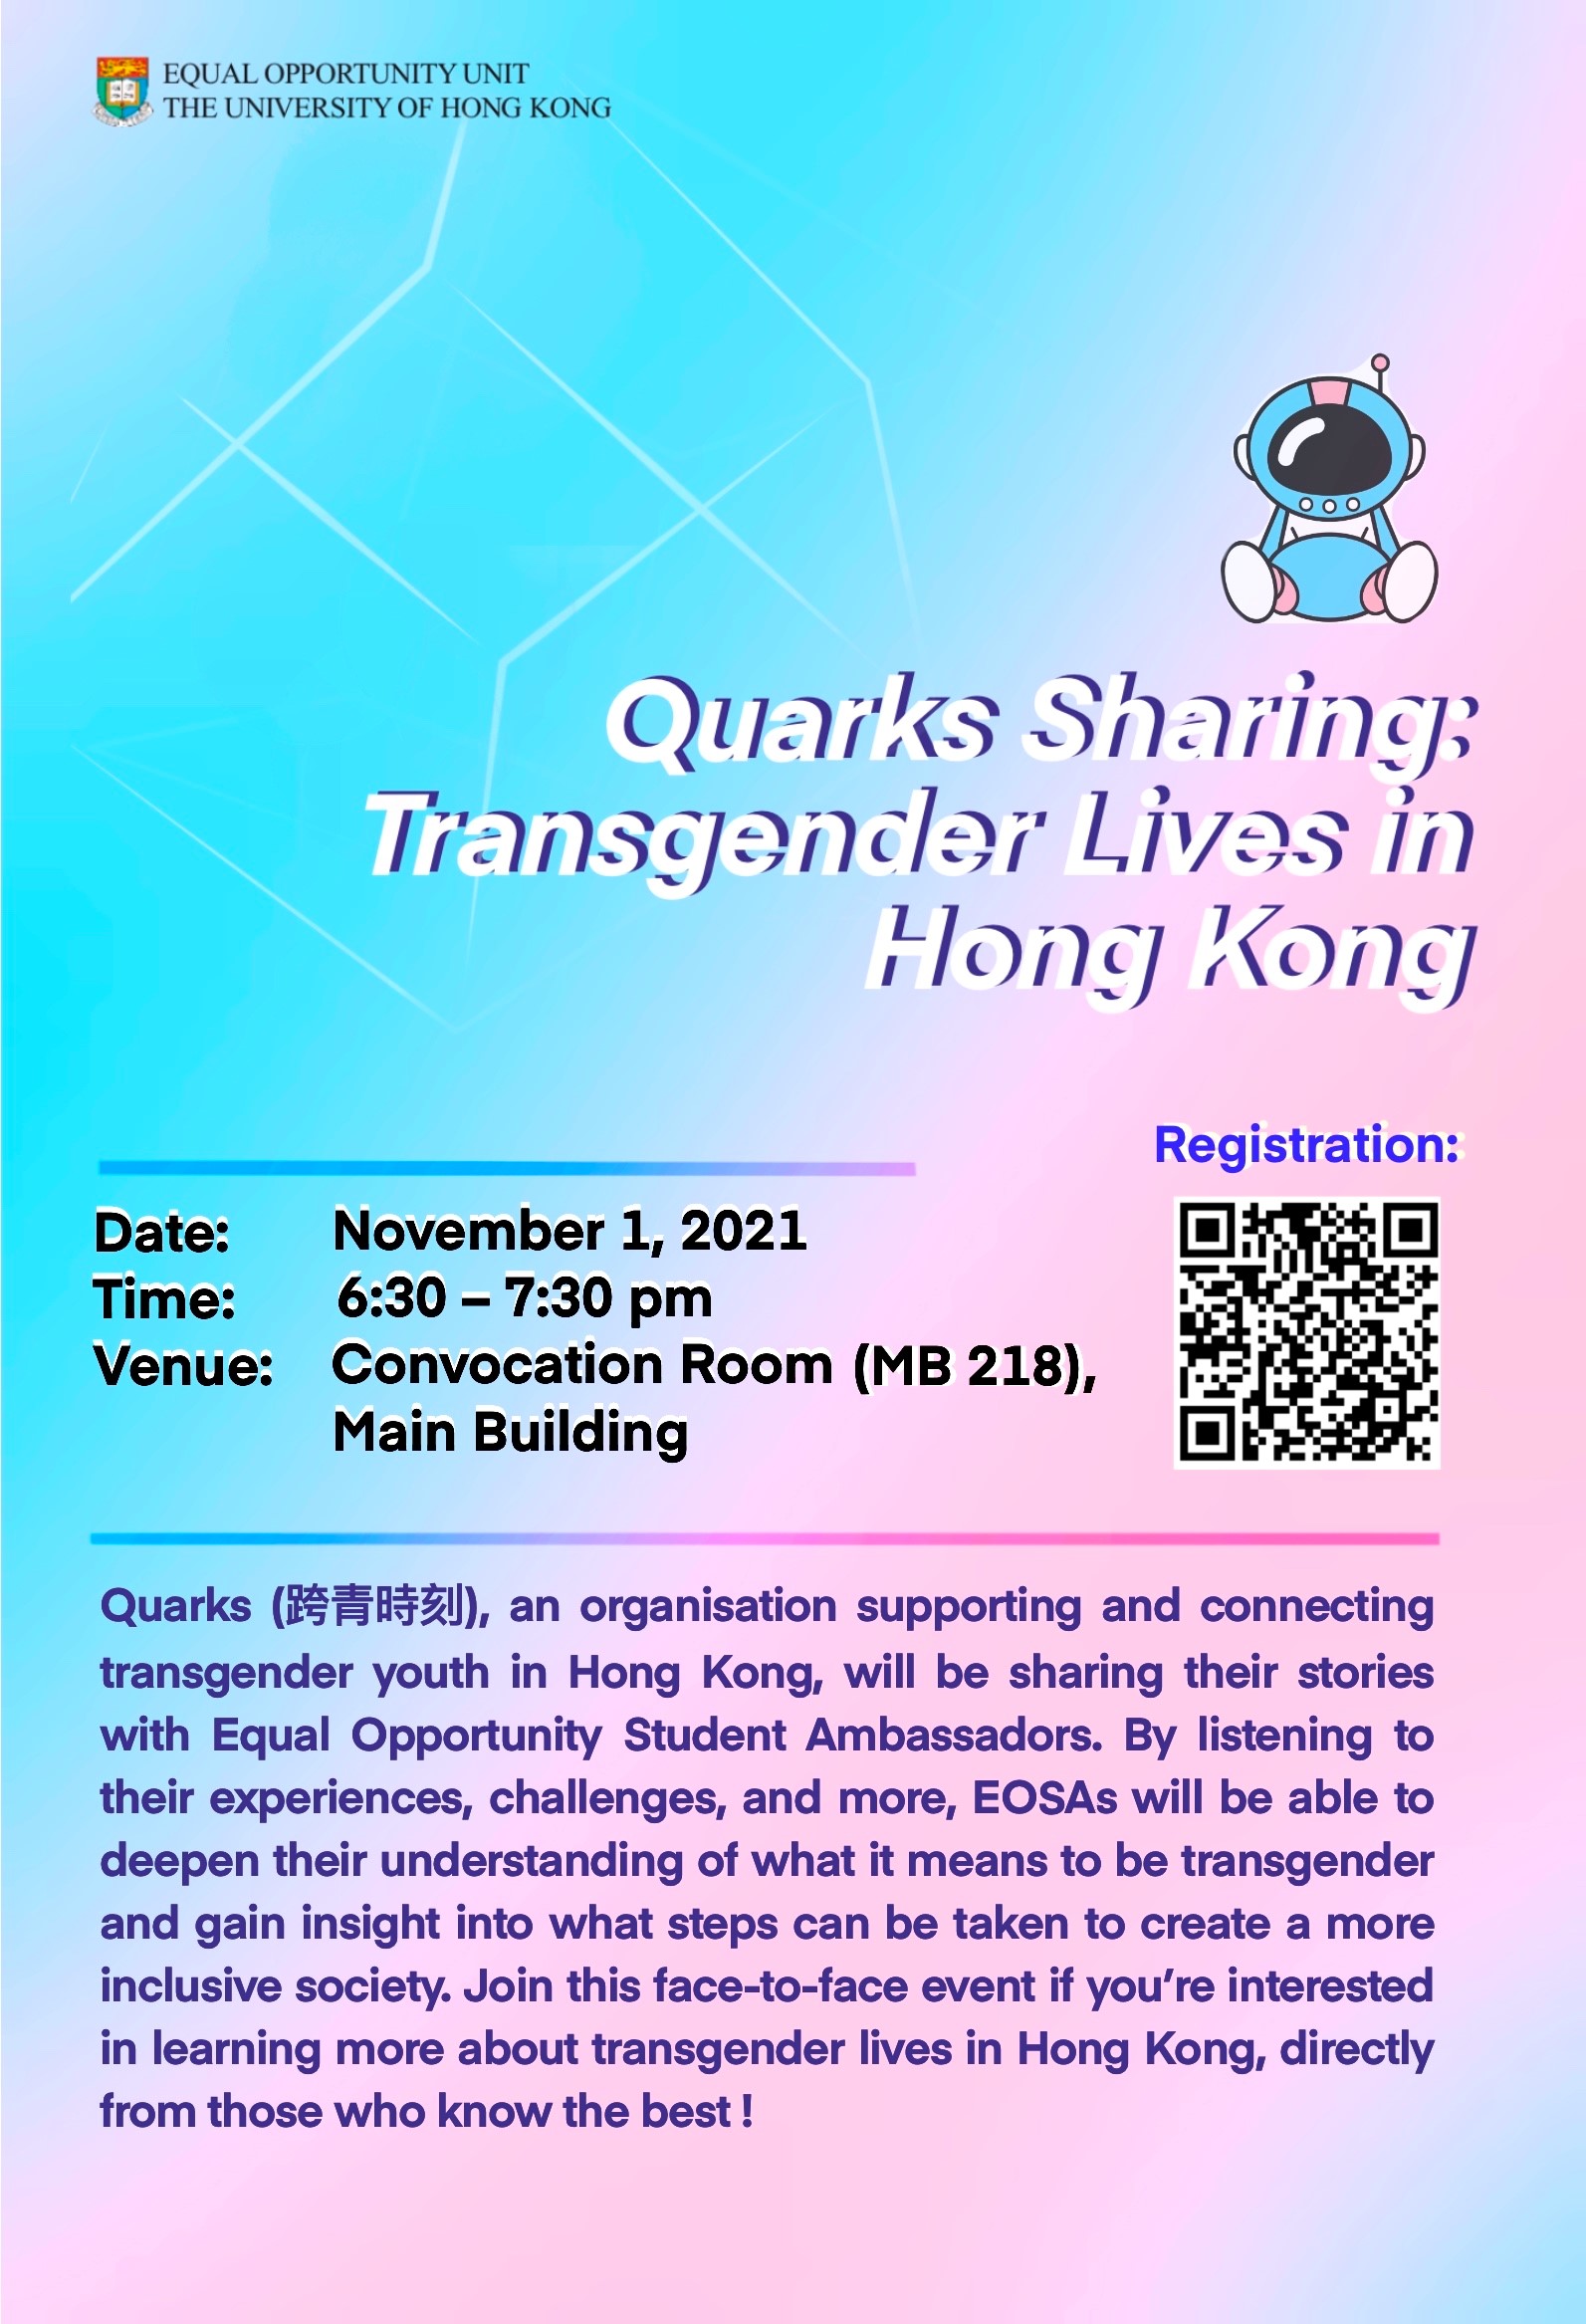 Quarks Sharing Event Poster, same as text in content